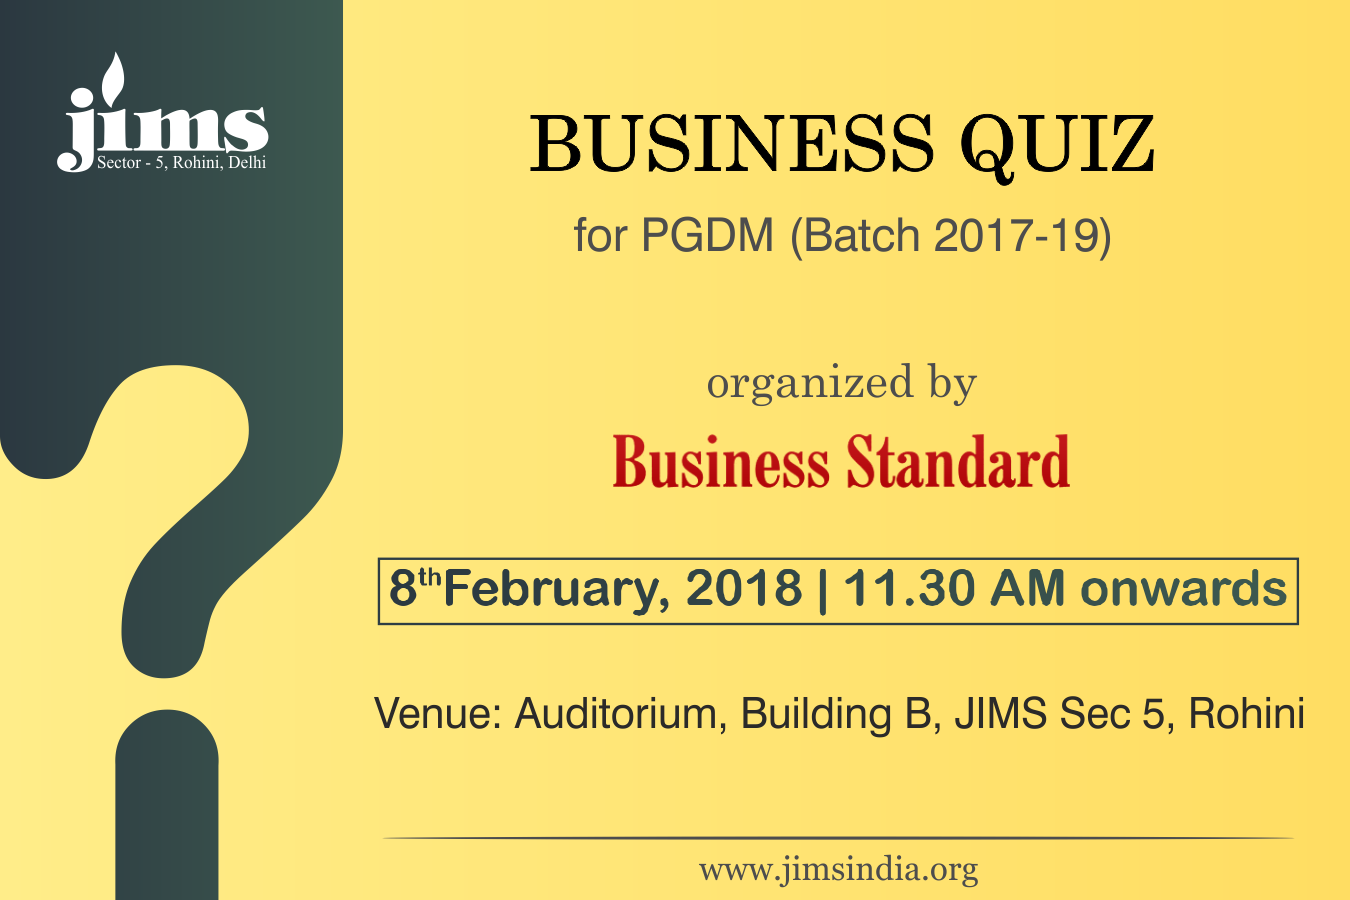 A written Business Quiz is being organized by Business Standard for PGDM Batch 2017-19 at JIMS Rohini